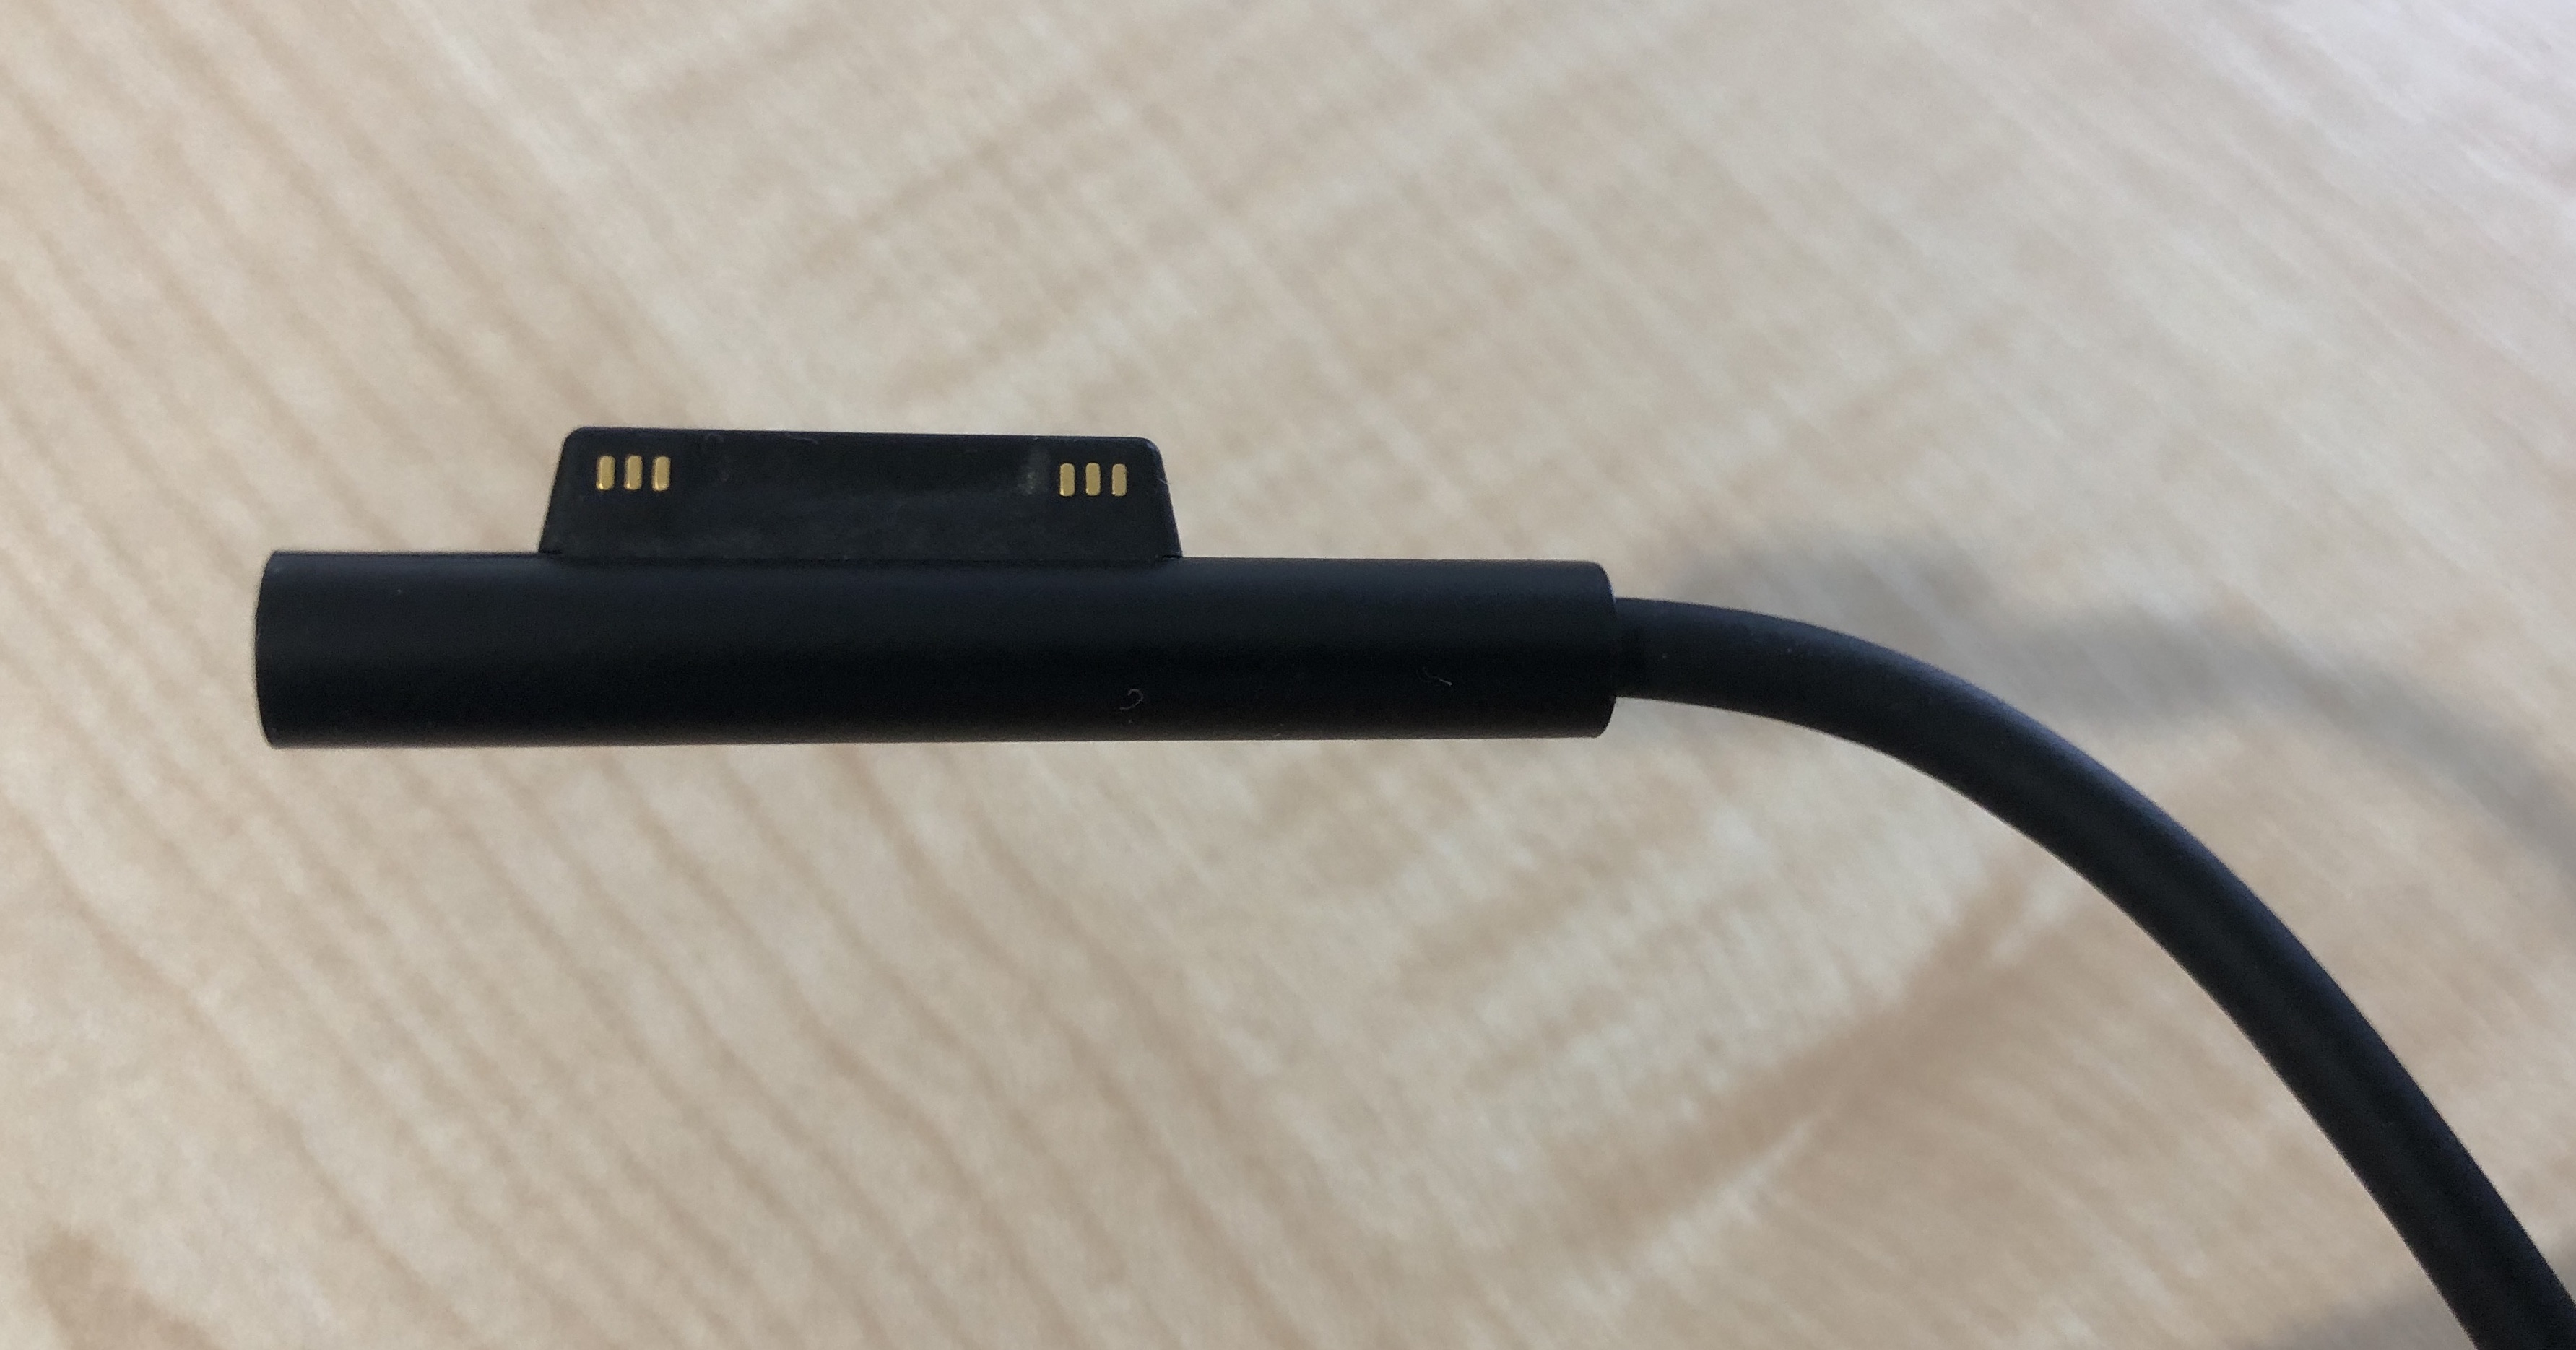 Surface Pro 6 charging cable without strain relief